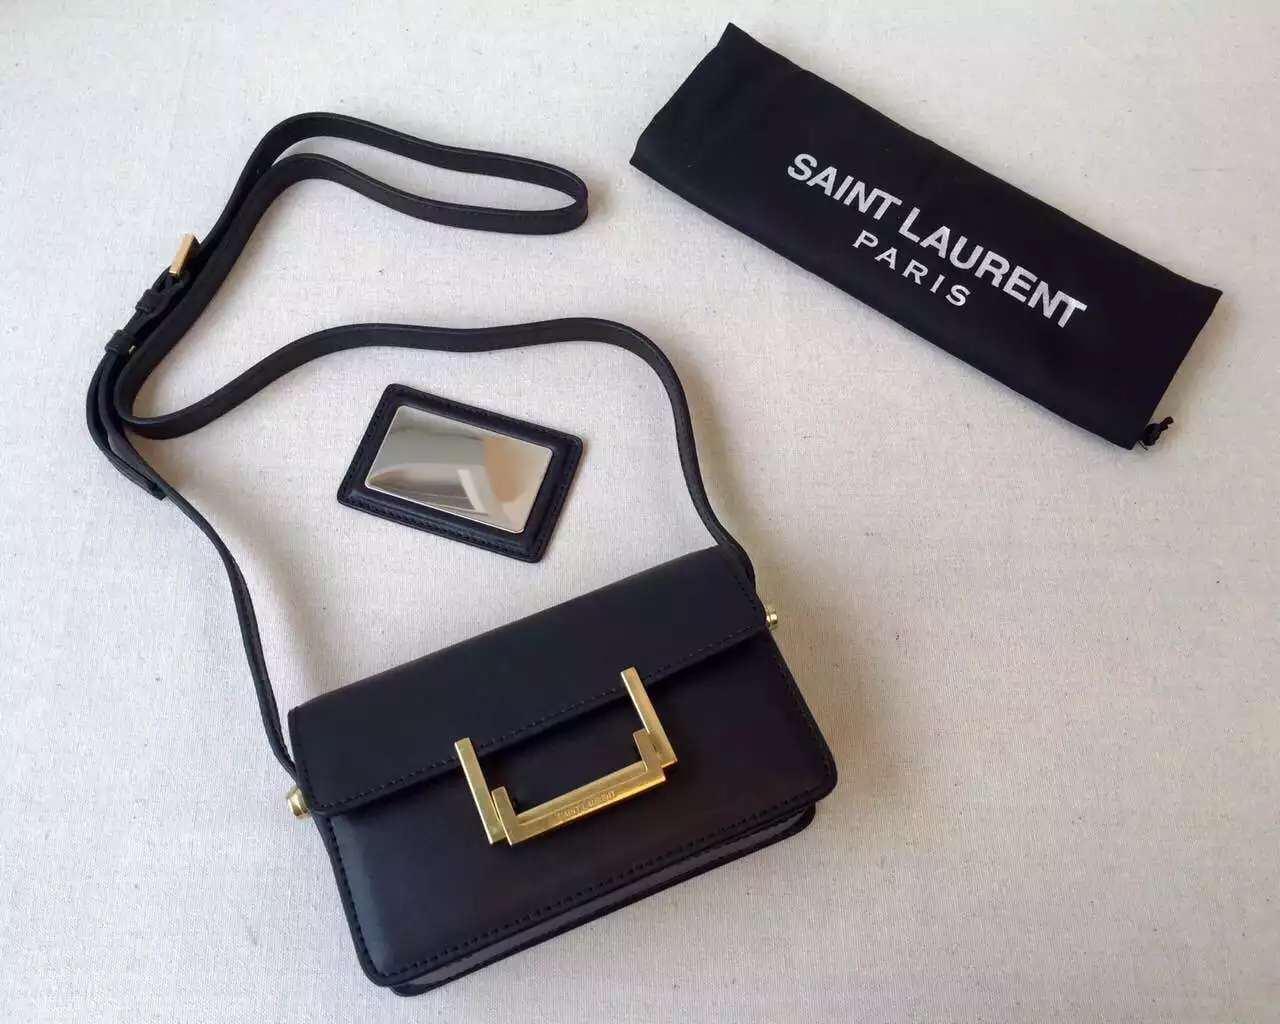 2015 Cheap YSL Out-Sale with Free Shipping-Saint Laurent Classic Small Lulu Leather Bag in Black Calfskin Leather